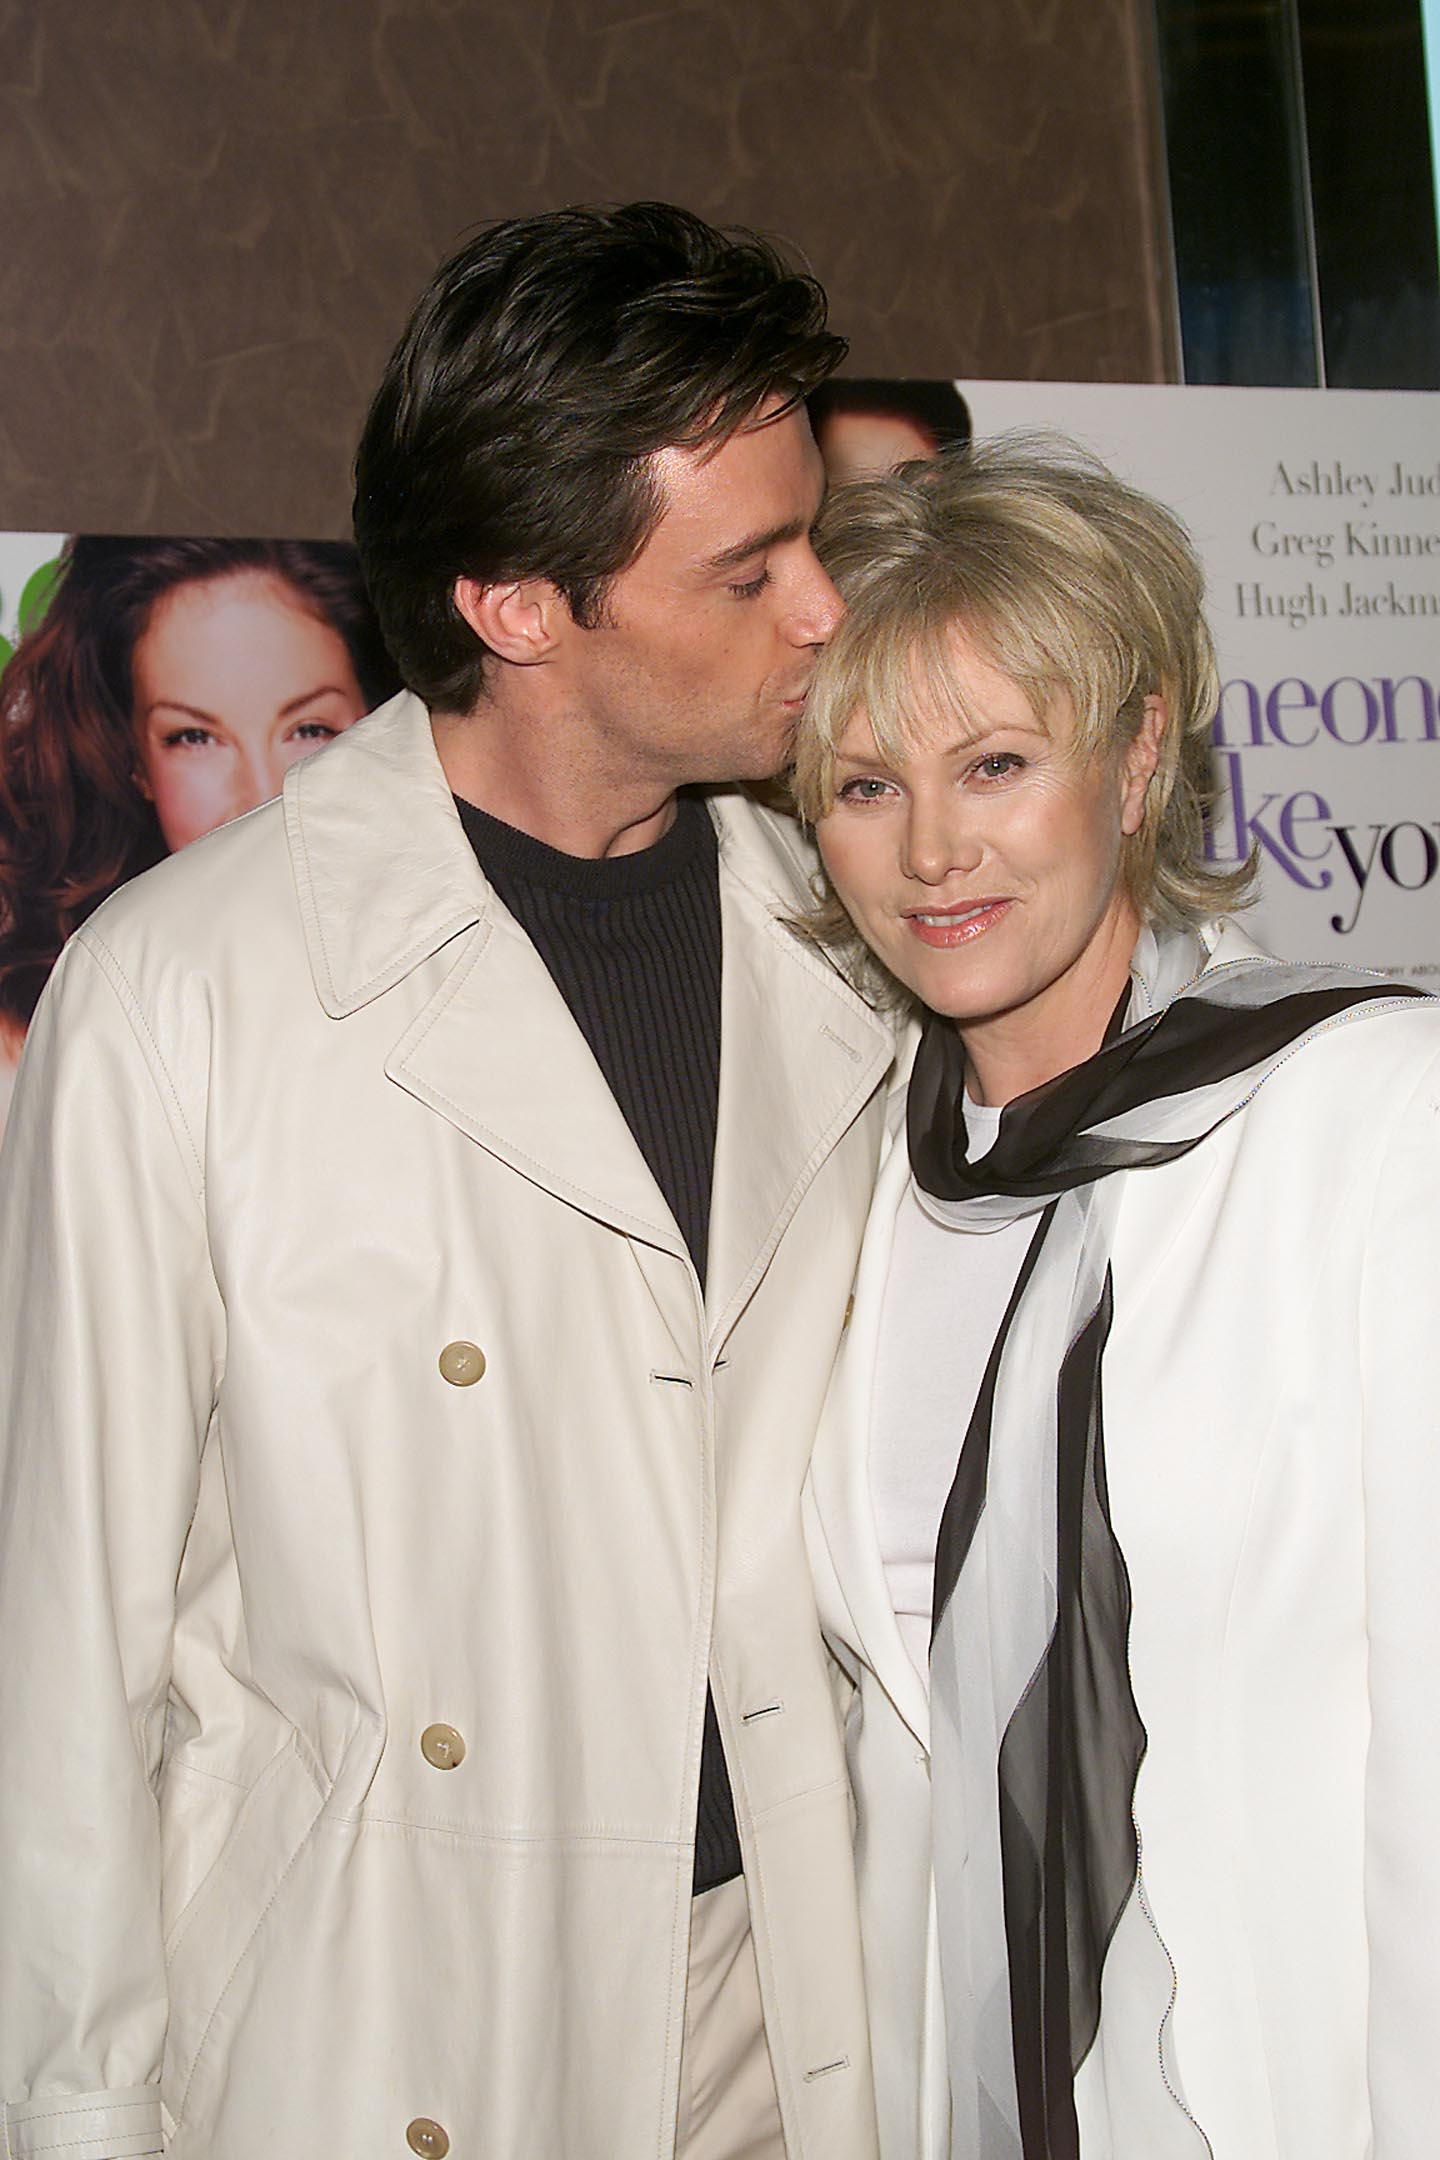 Hugh Jackman and Deborra-Lee Furness at the "Someone Like You" premiere in New York City, 2001 | Source: Getty Images